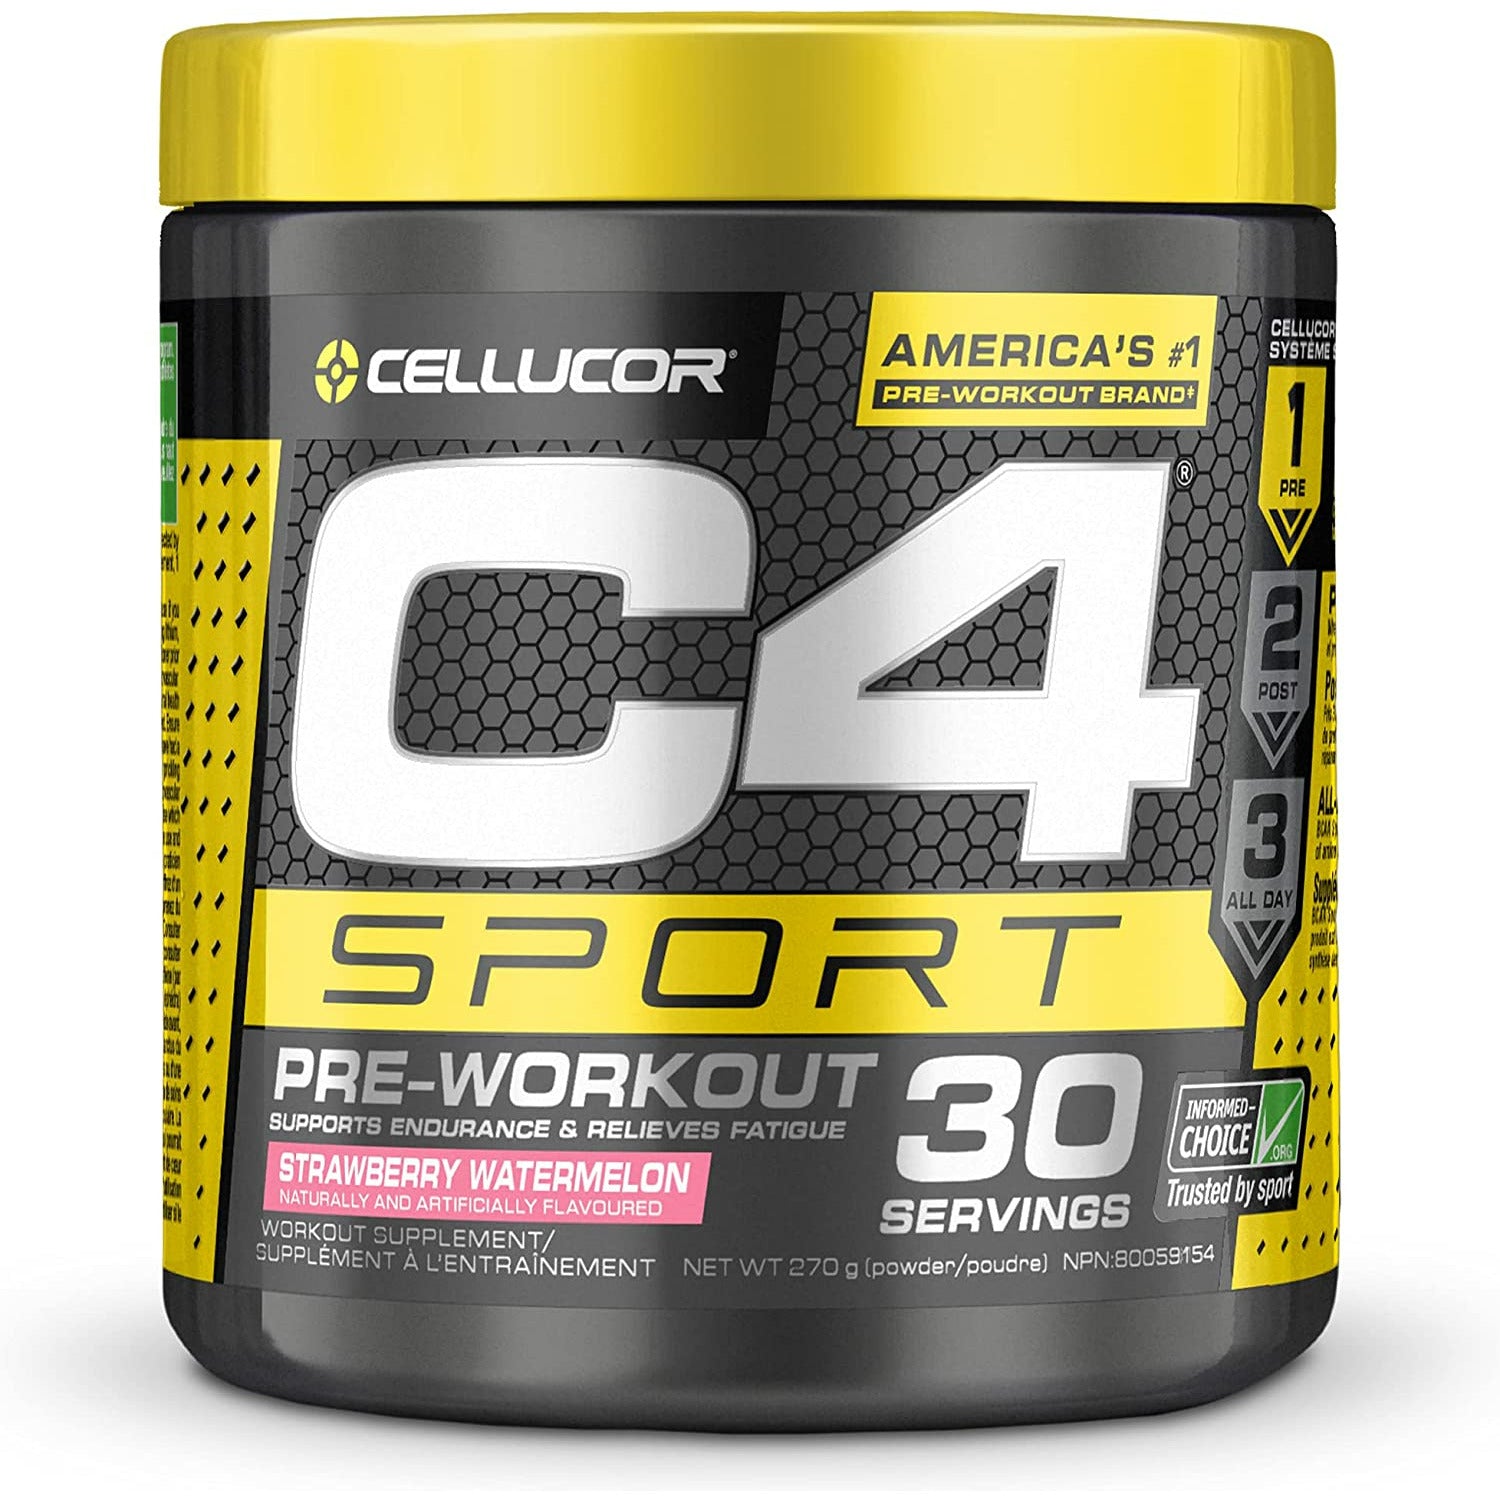 Cellucor NEW C4 SPORT Pre-Workout (30 servings) Watermelon Strawberry Cellucor